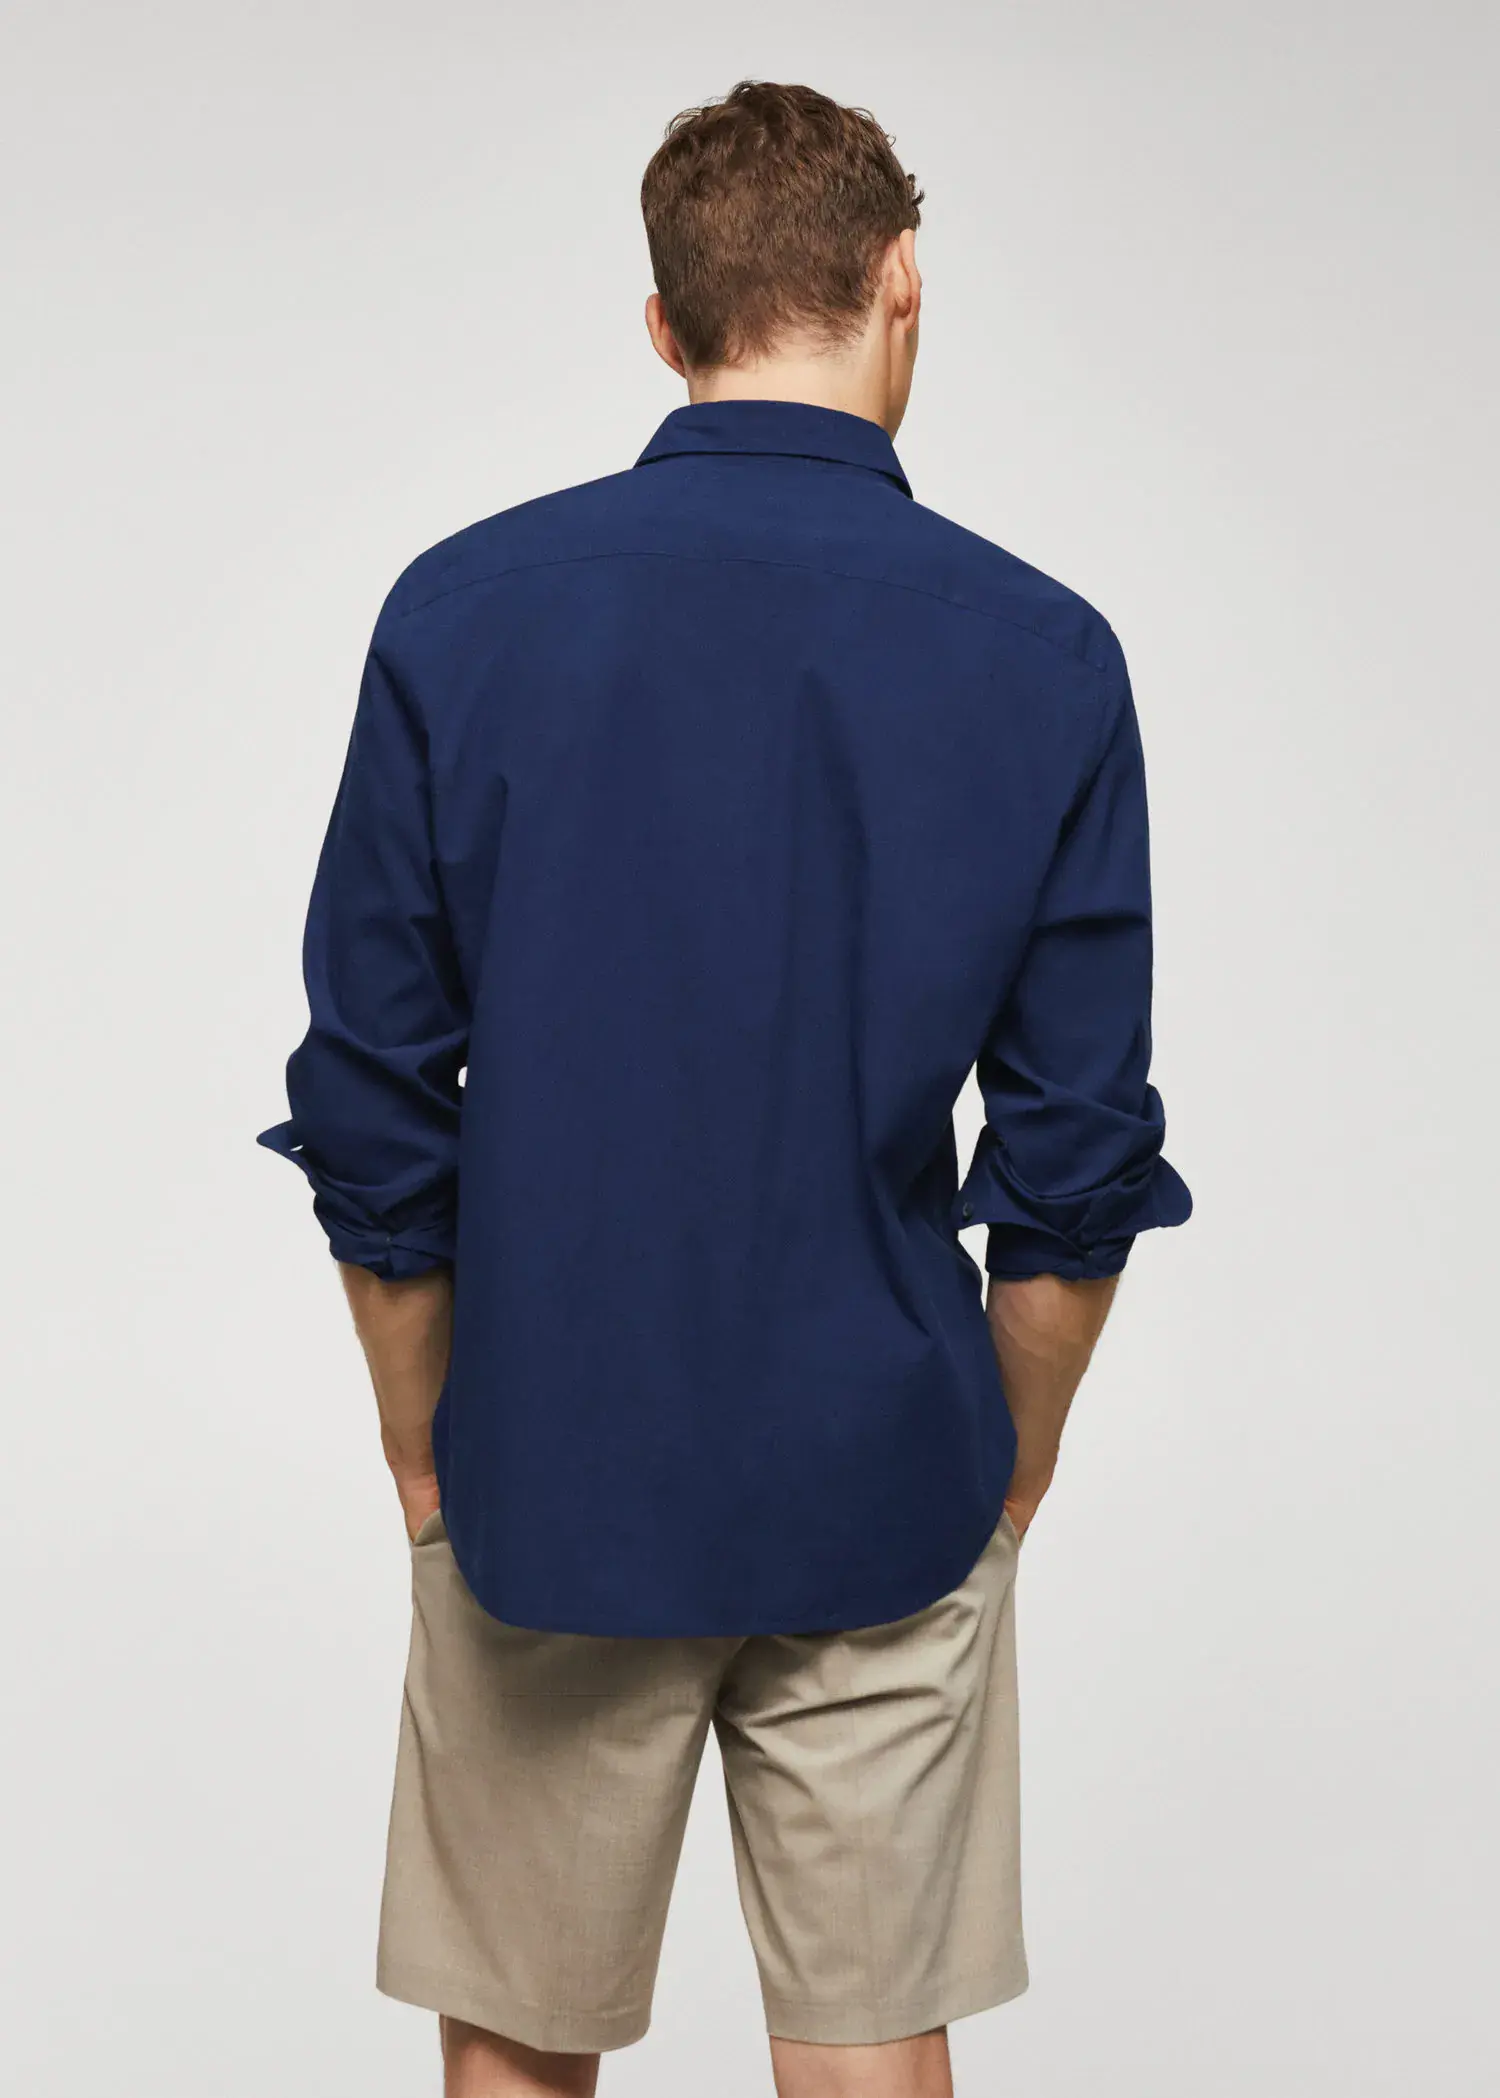 Mango Slim-fit cotton seersucker shirt. a man in a blue shirt is standing with his hands in his pockets 